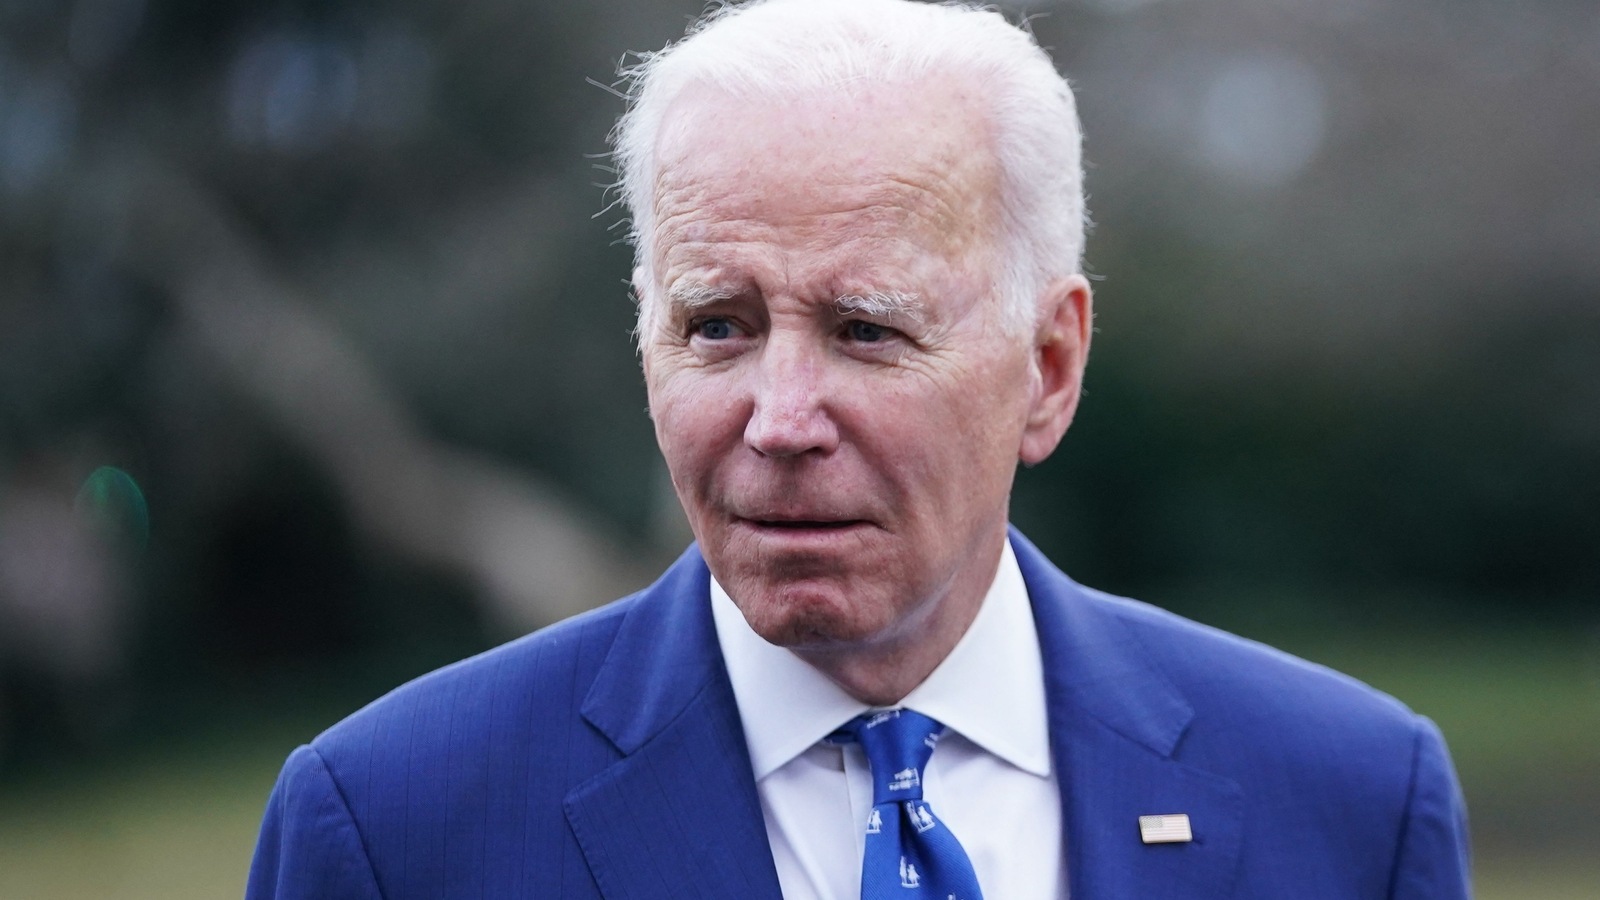 US: 6 more secret papers discovered from President Biden's home, says lawyer